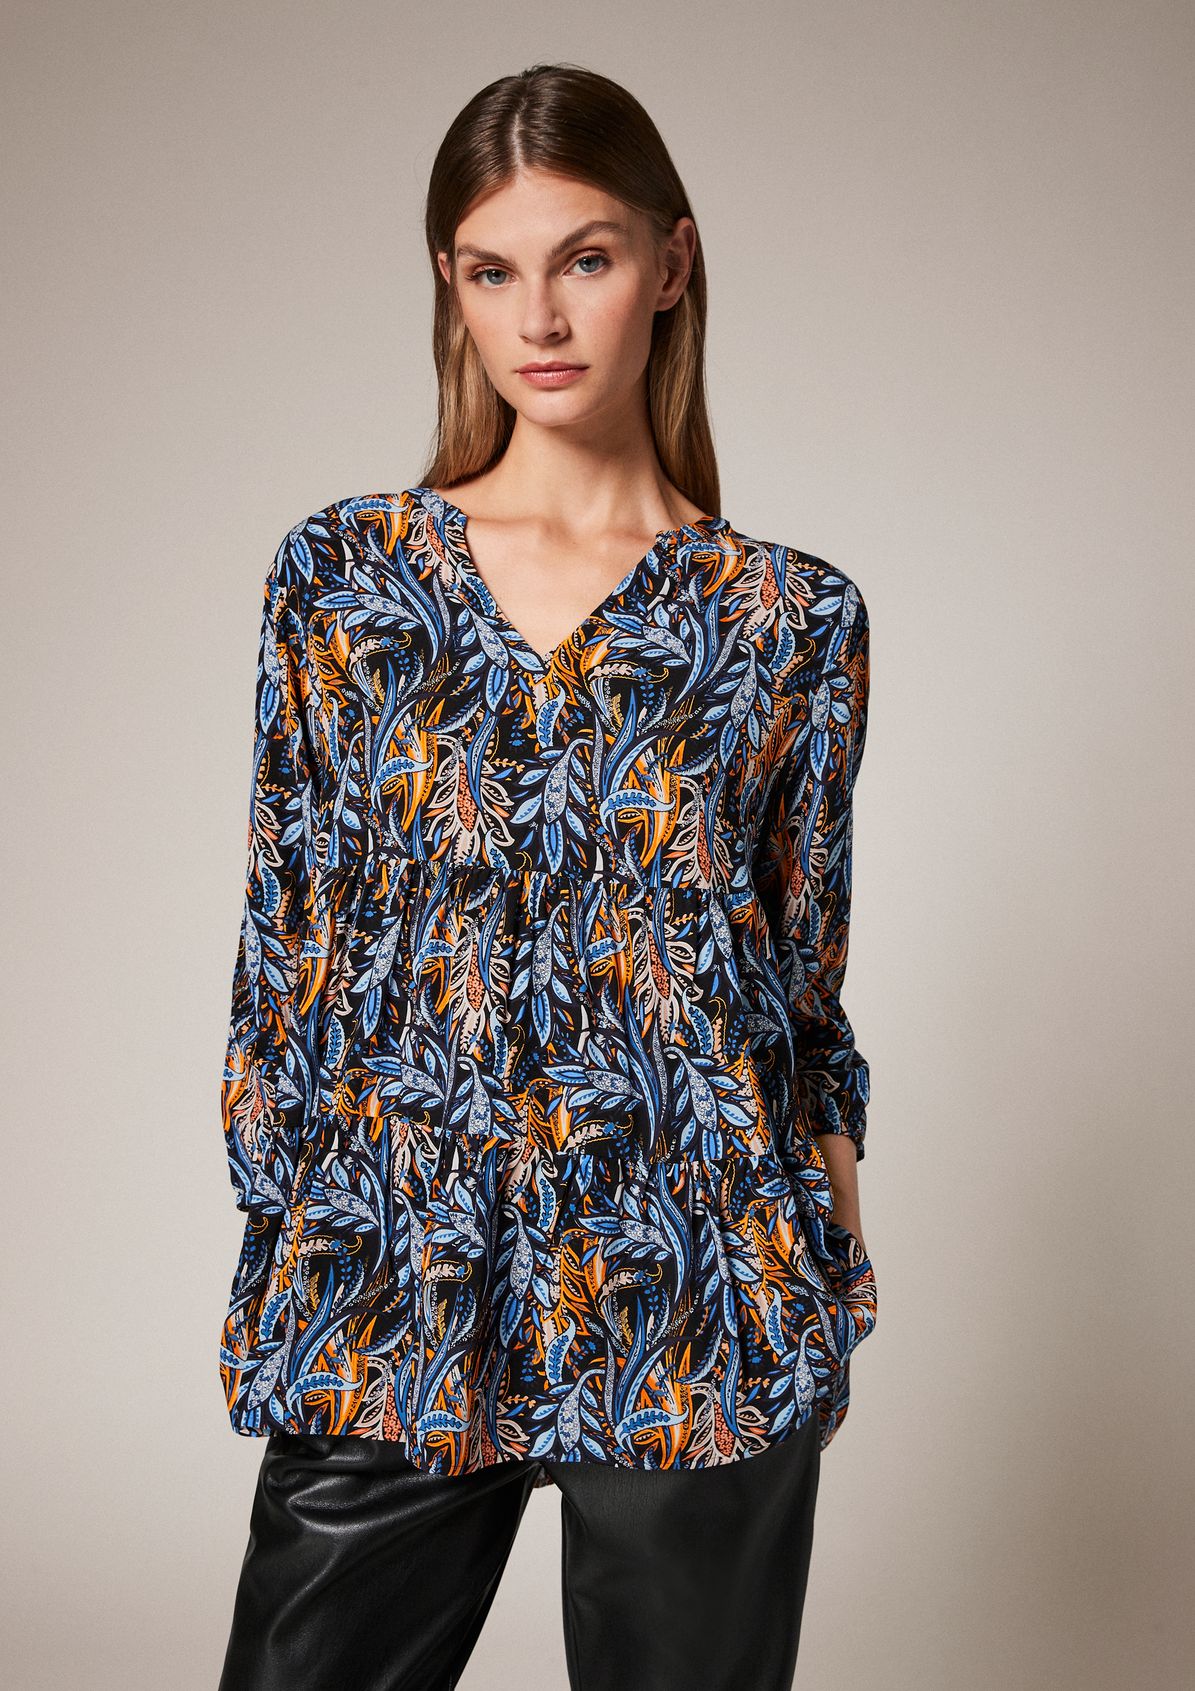 Chiffon blouse with a paisley print from comma